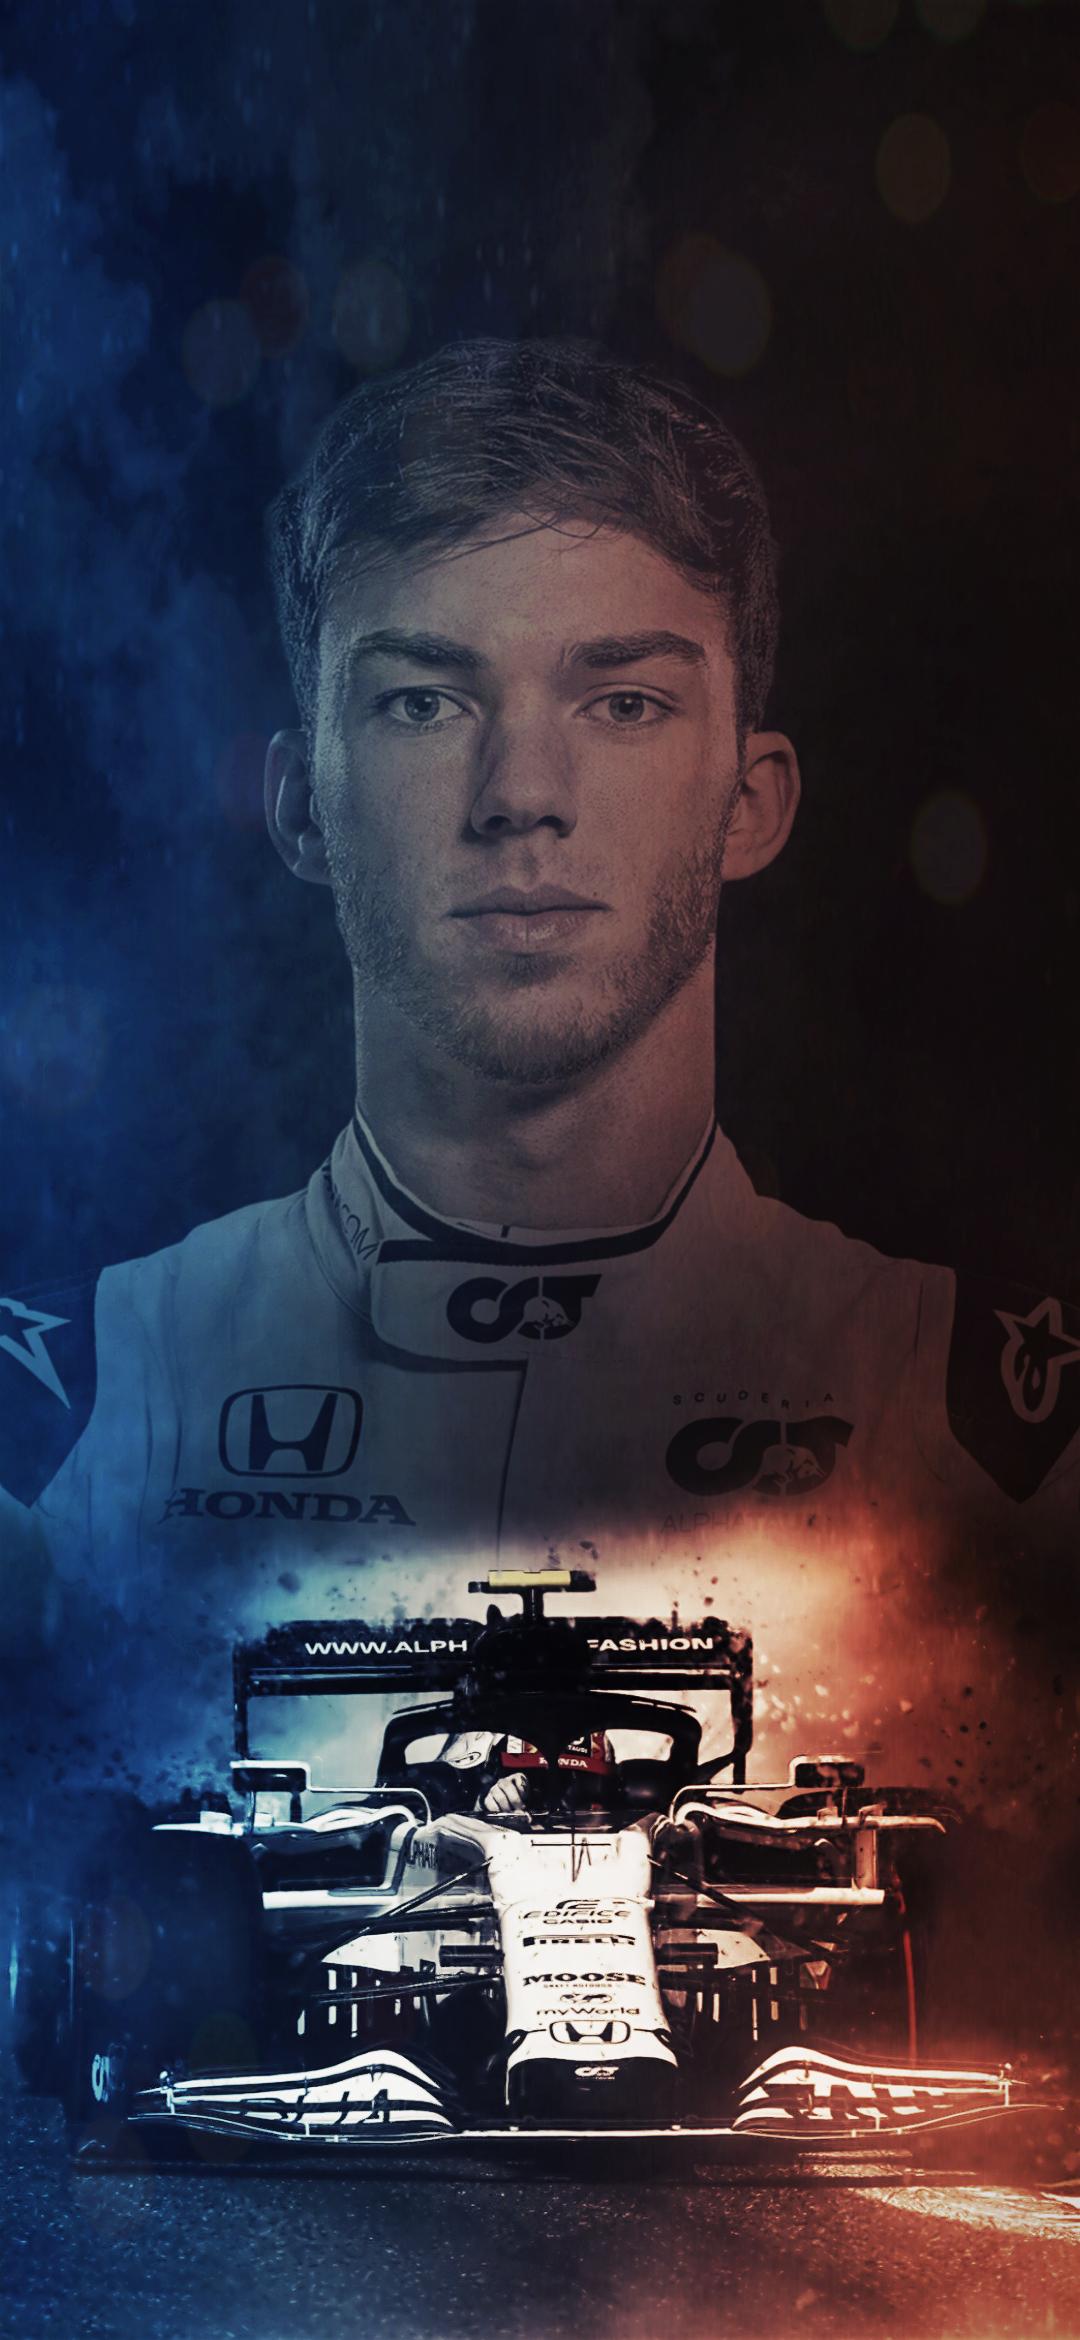 Pierre Gasly phone wallpaper I made: F1Porn